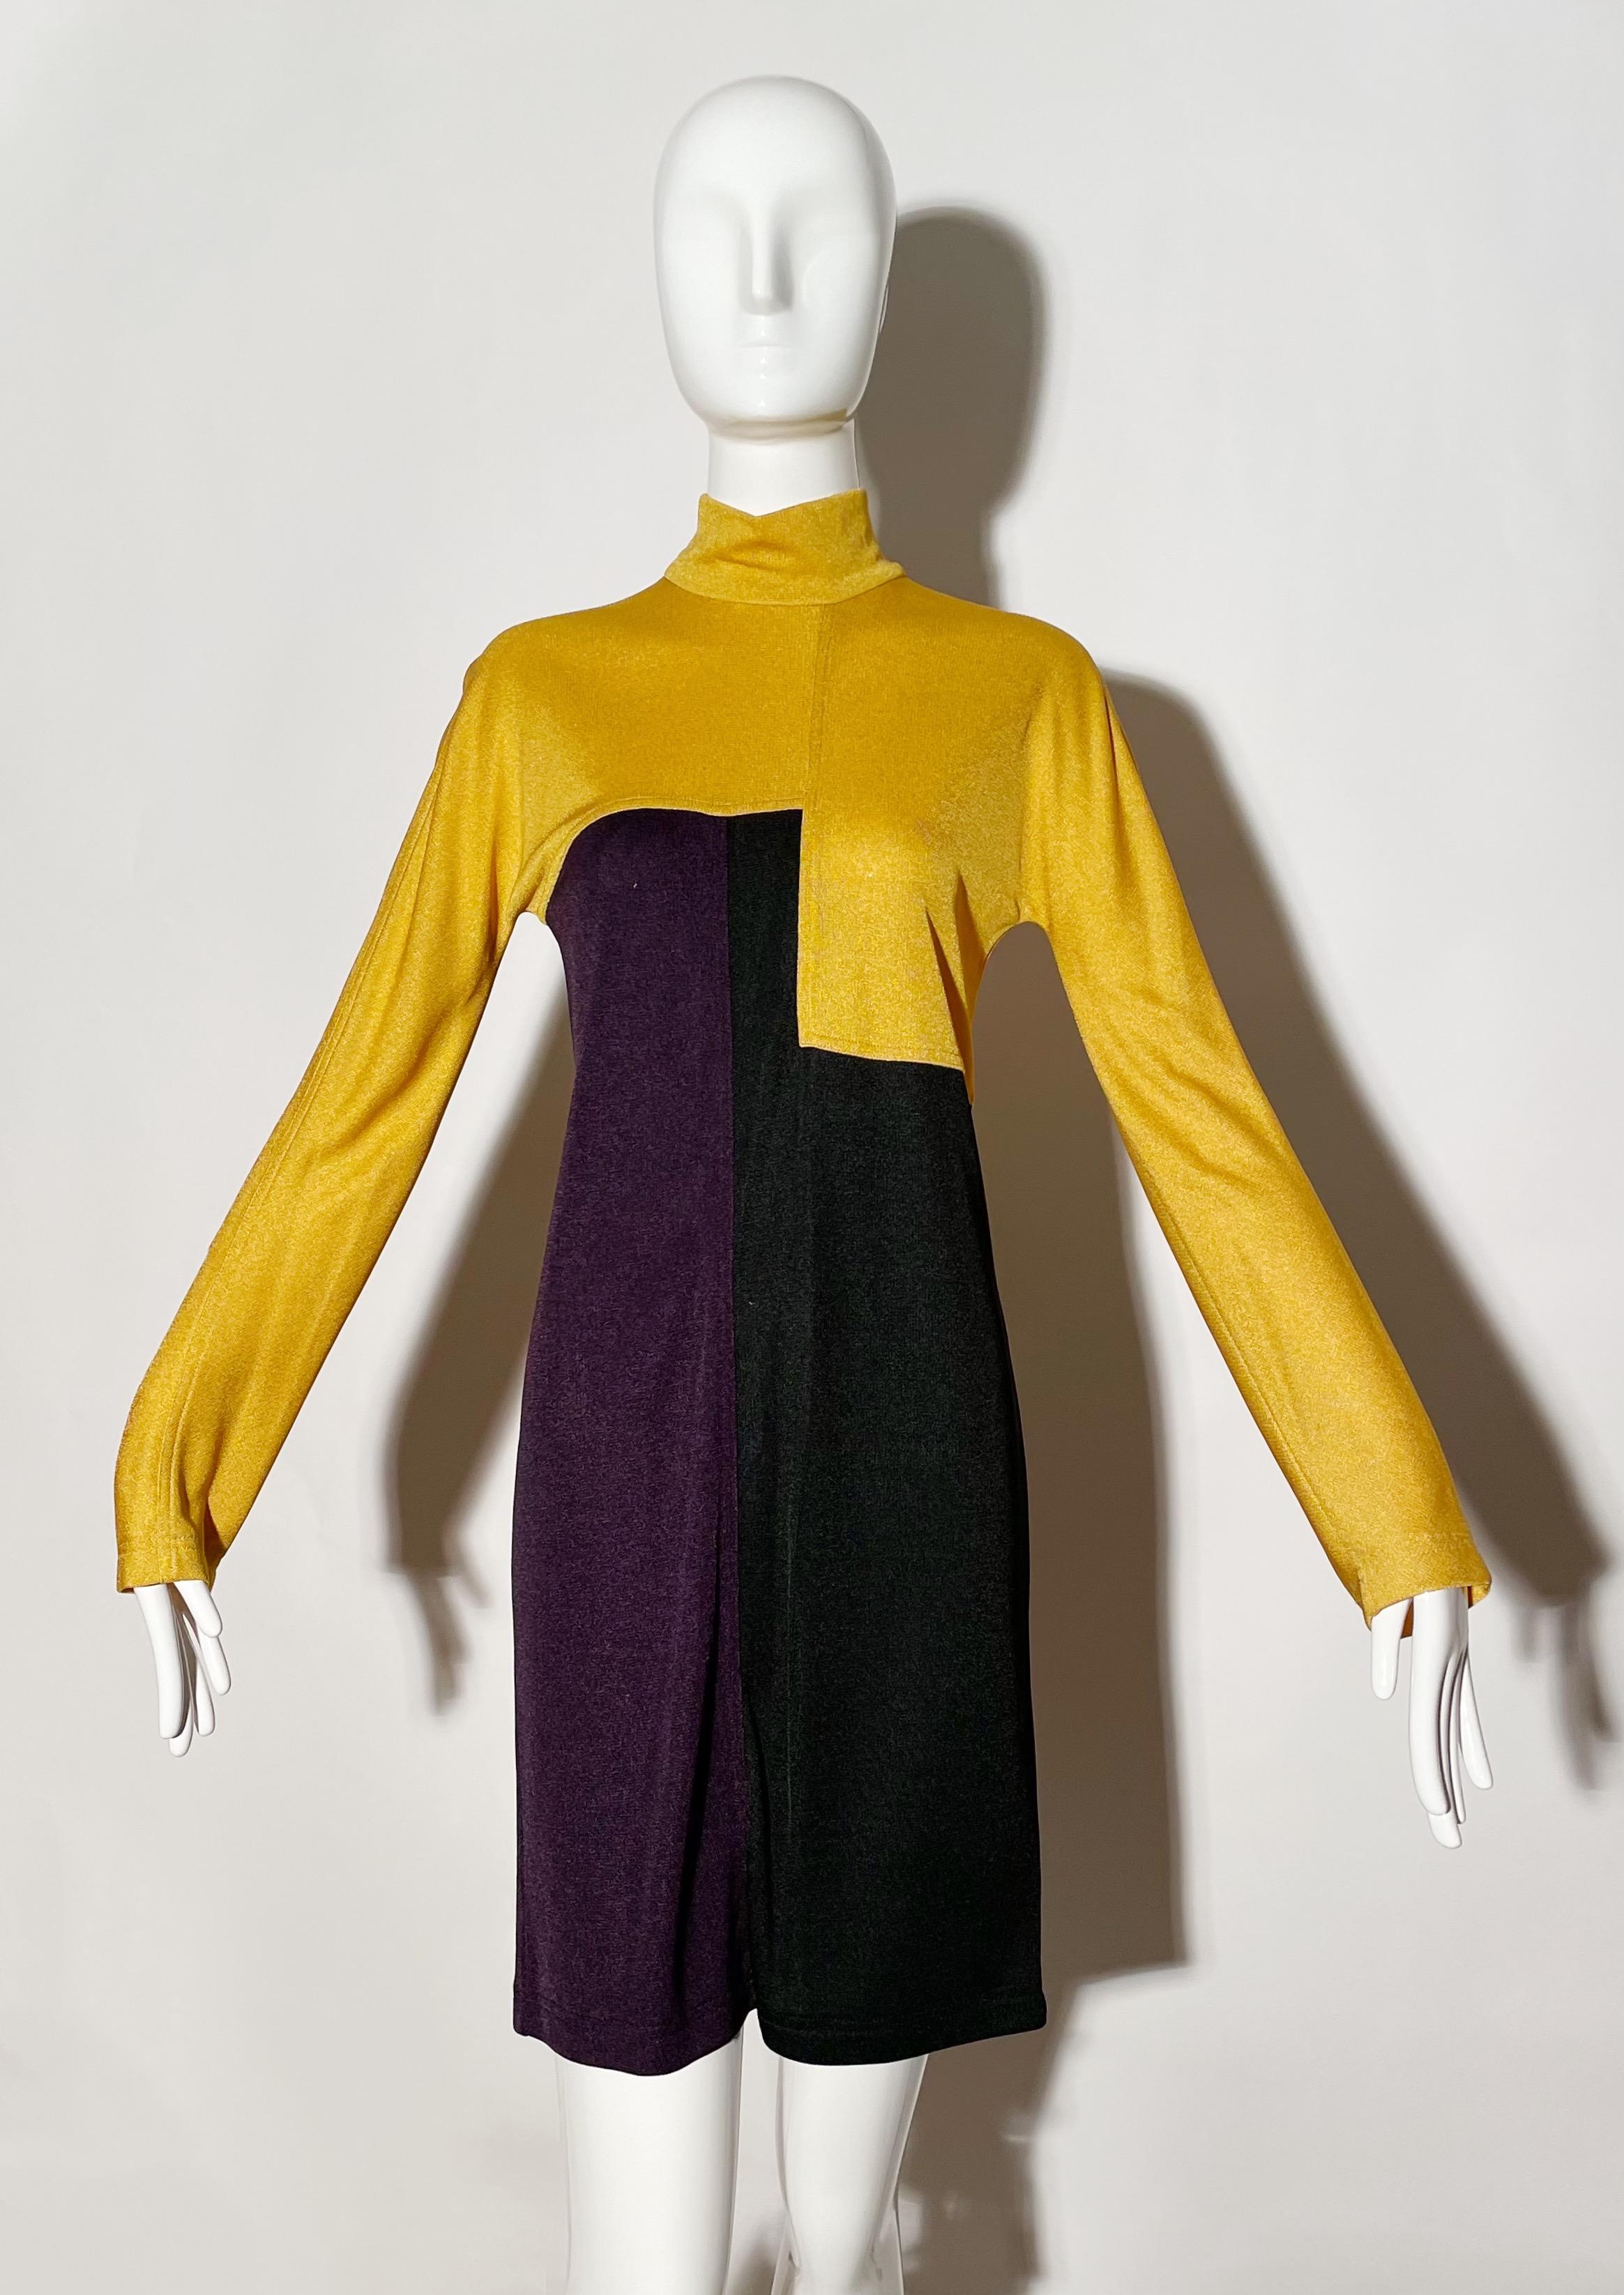 Colorblock knit long sleeve dress. Rear zipper. Stretchy knit. Made in Italy. 

*Condition: excellent vintage condition. No visible flaws.

Measurements Taken Laying Flat (inches)—
Shoulder to Shoulder: 17 in.
Bust: 34 in.
Waist: 30 in.
Hip: 33